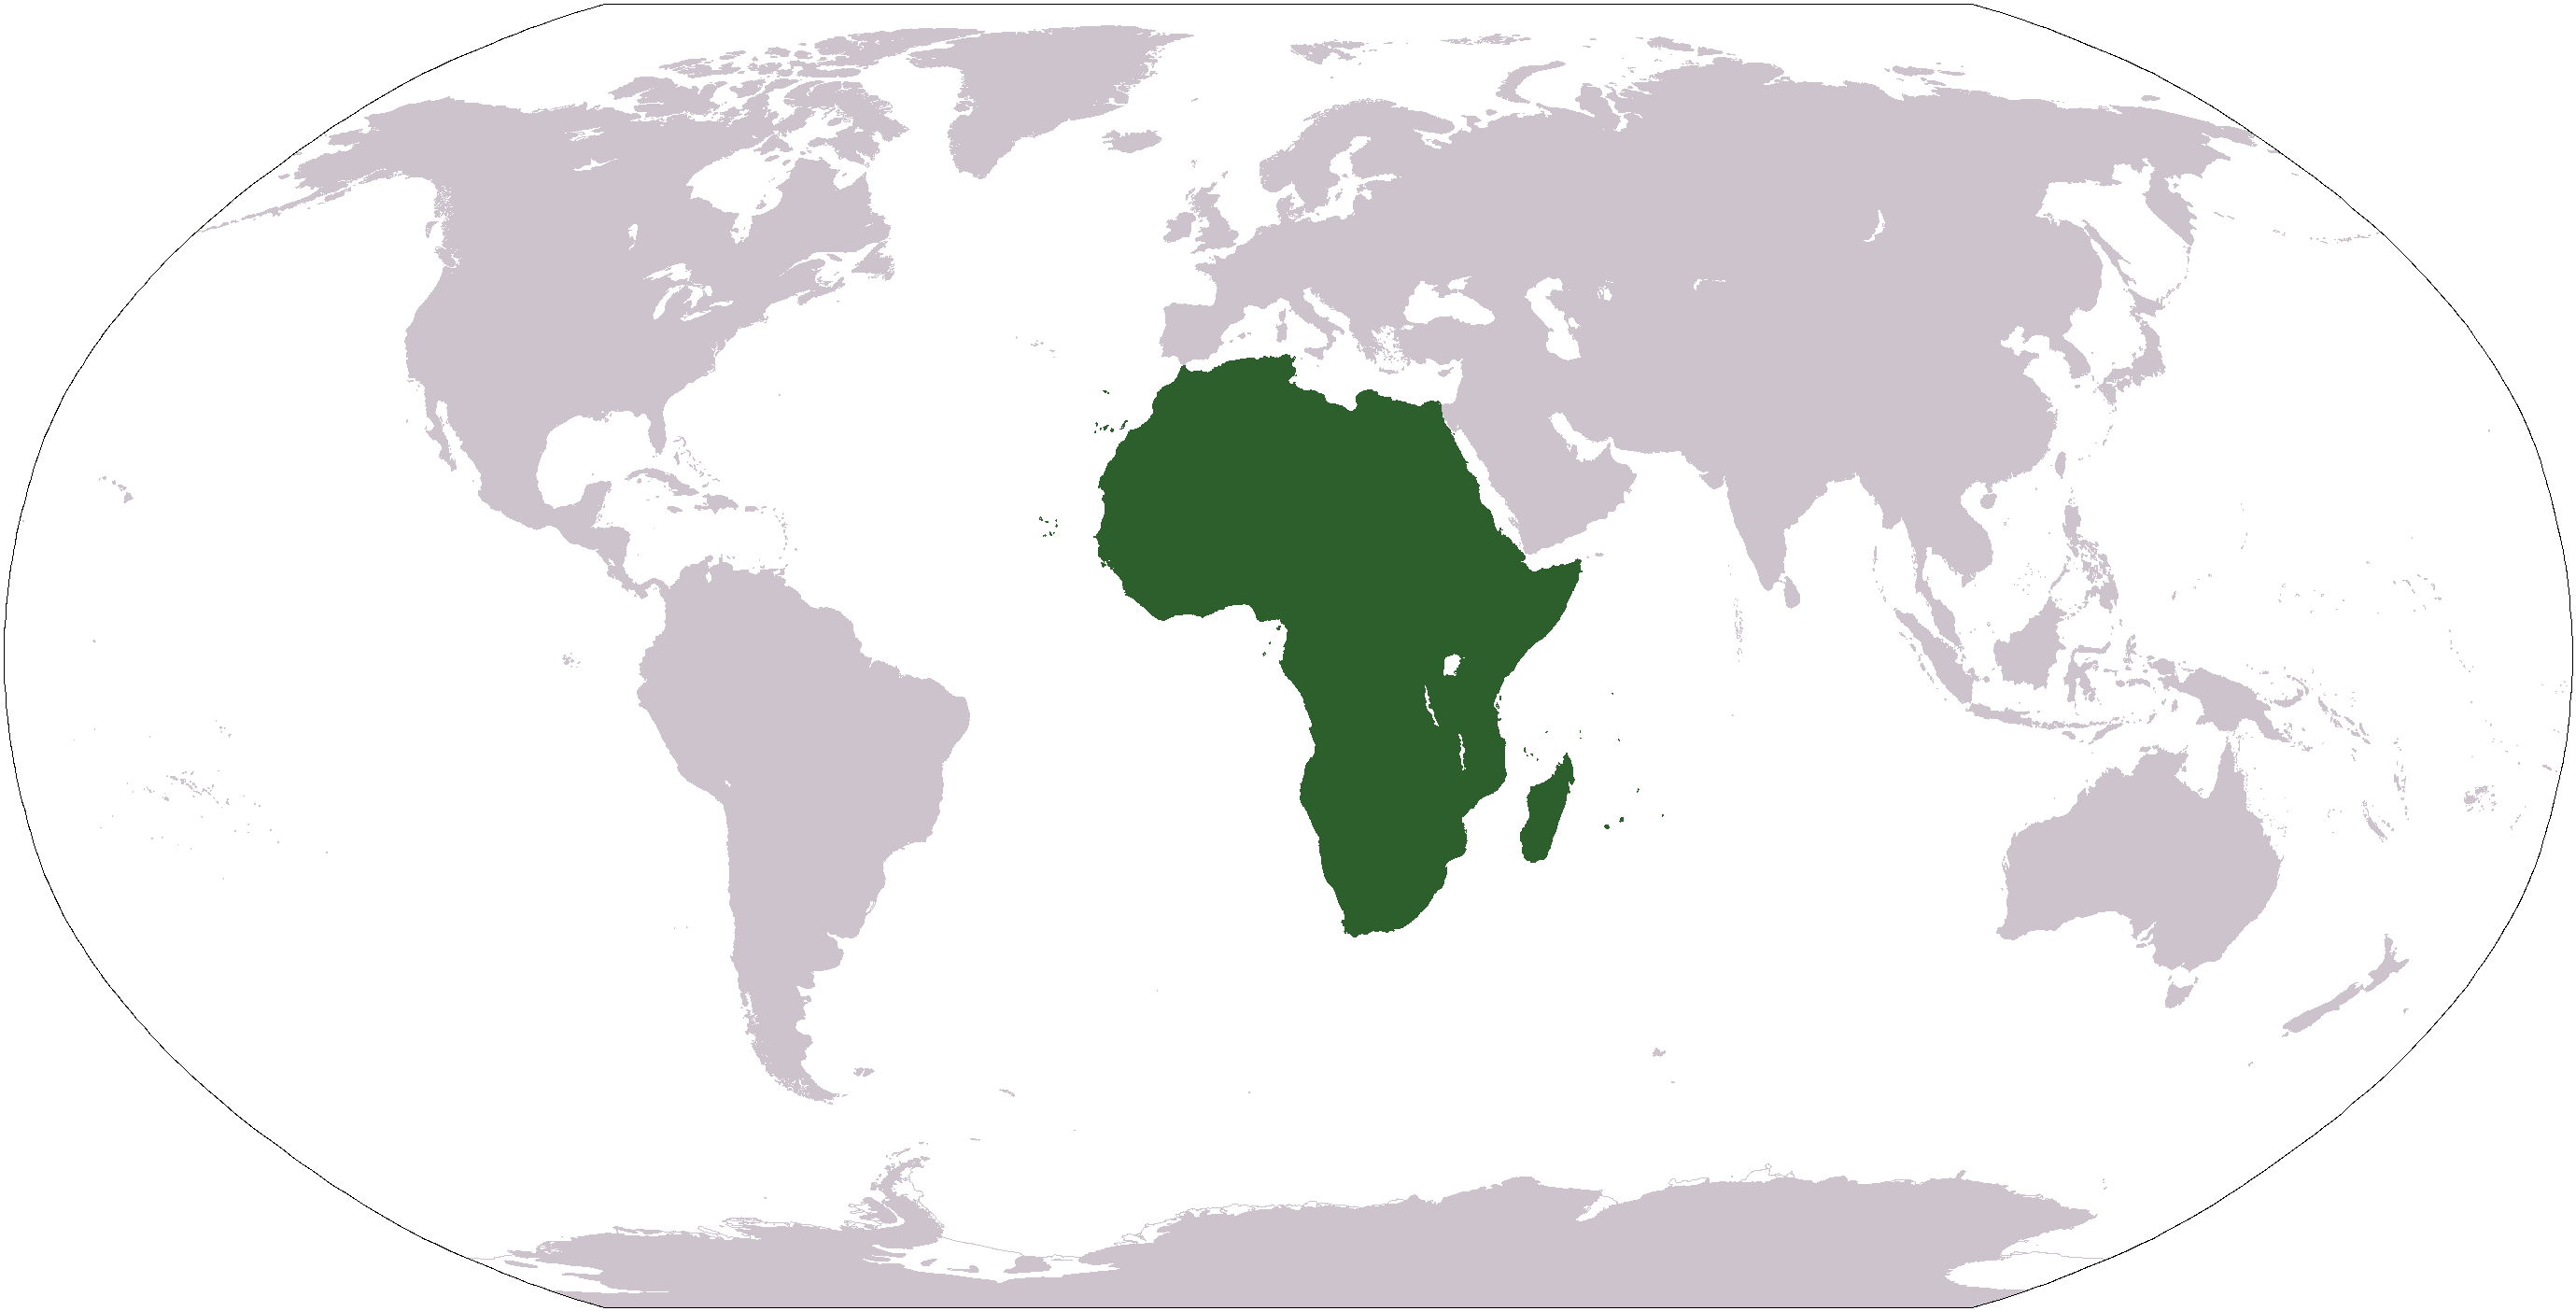 World map depicting the African continent